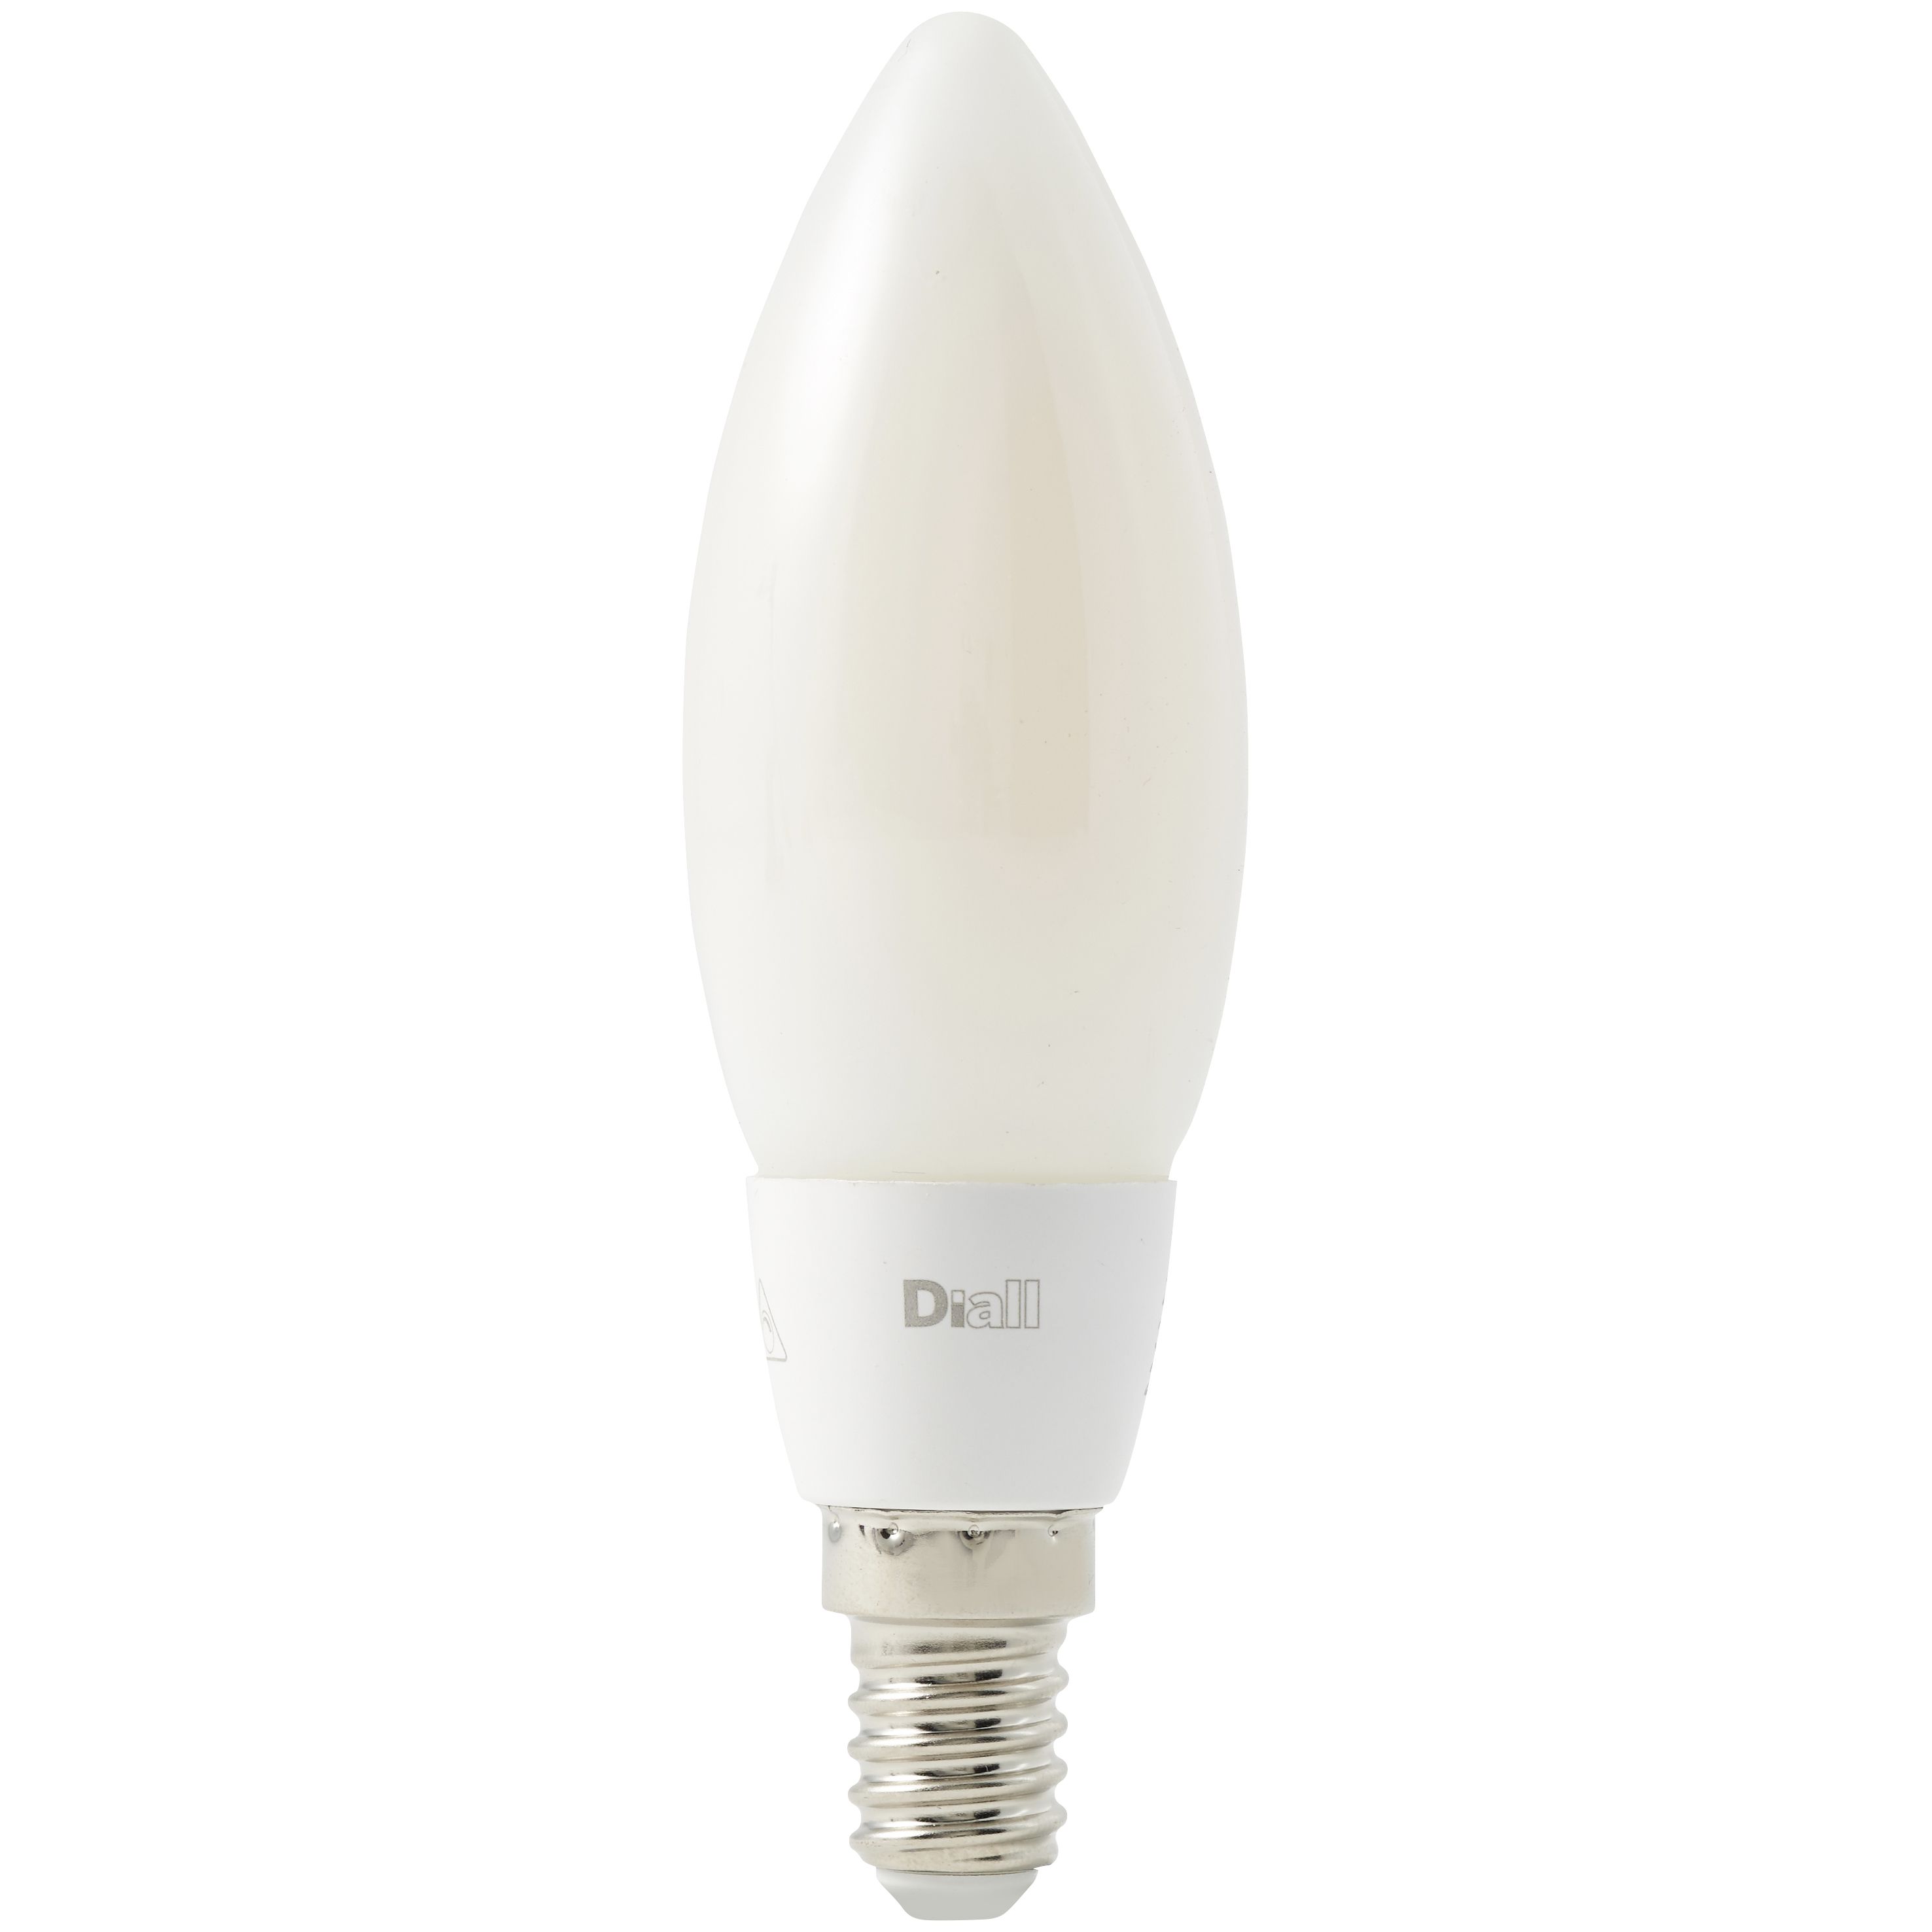 regeling aanpassen Begraafplaats Diall E14 7W 650lm Candle Warm white LED Dimmable Light bulb | DIY at B&Q